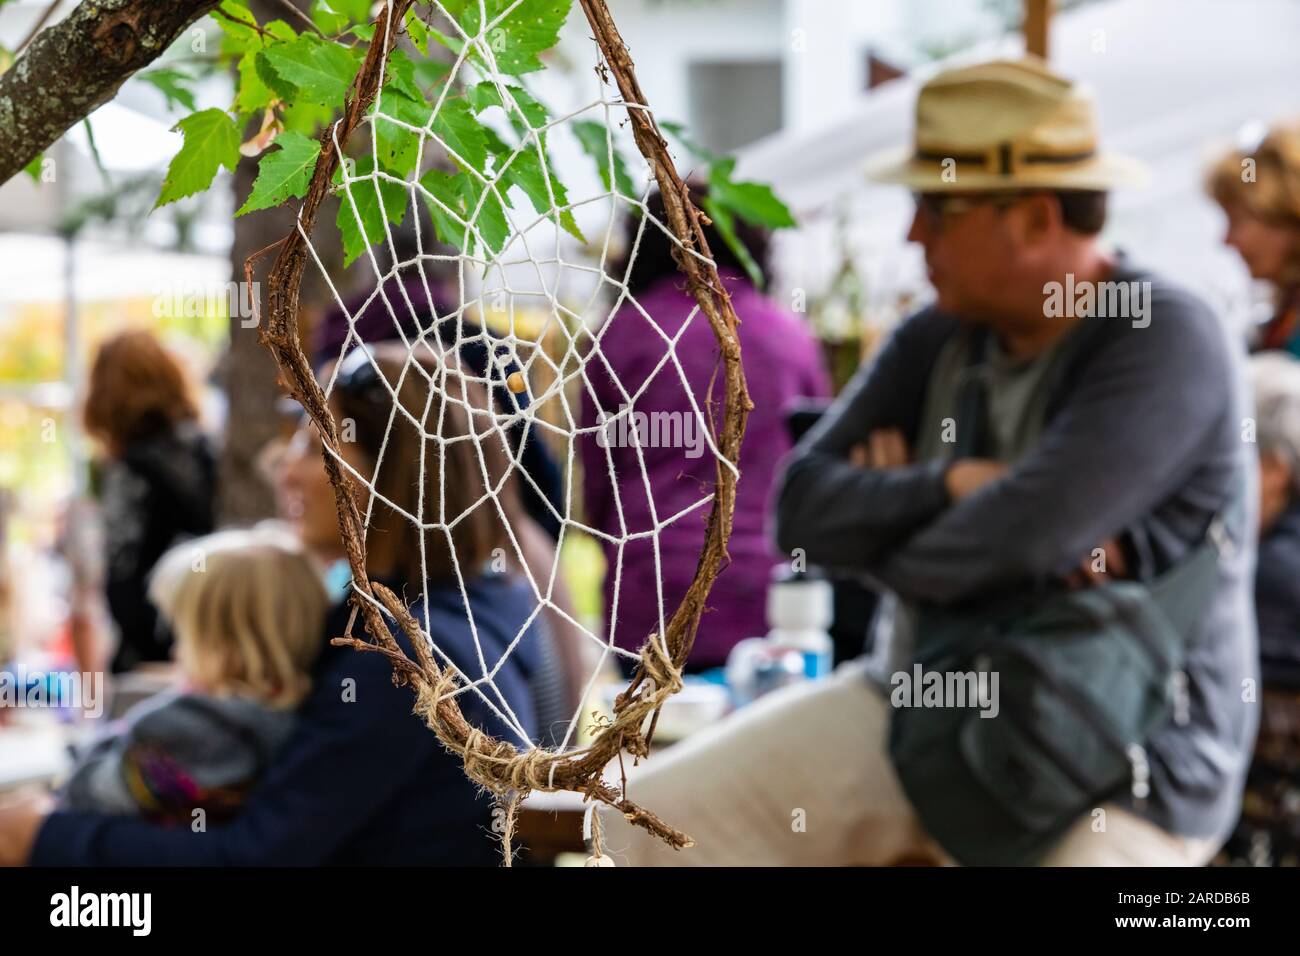 Closeup of handmade dreamcatcher hanging on tree branch with defocus group of people sitting and looking at something at outdoor event Stock Photo